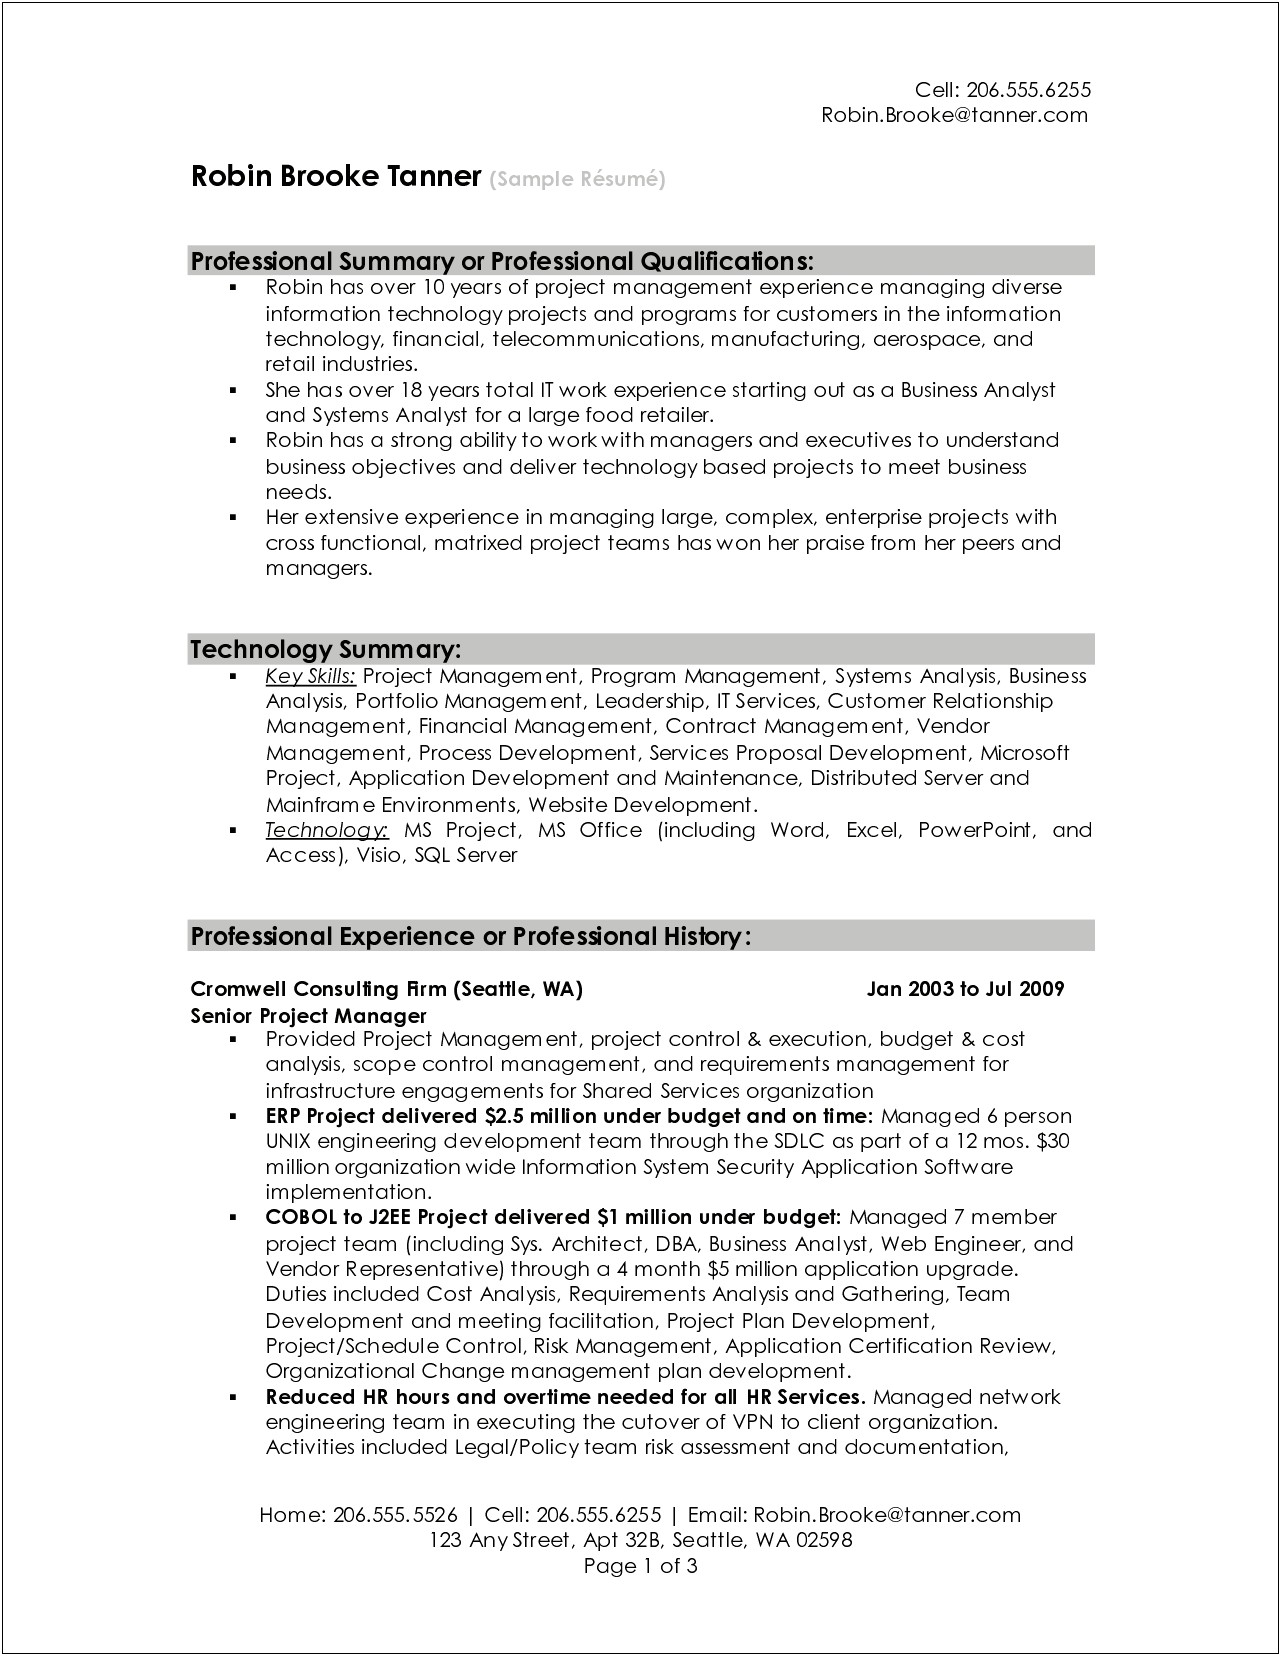 Examples Of A Summary On Resume